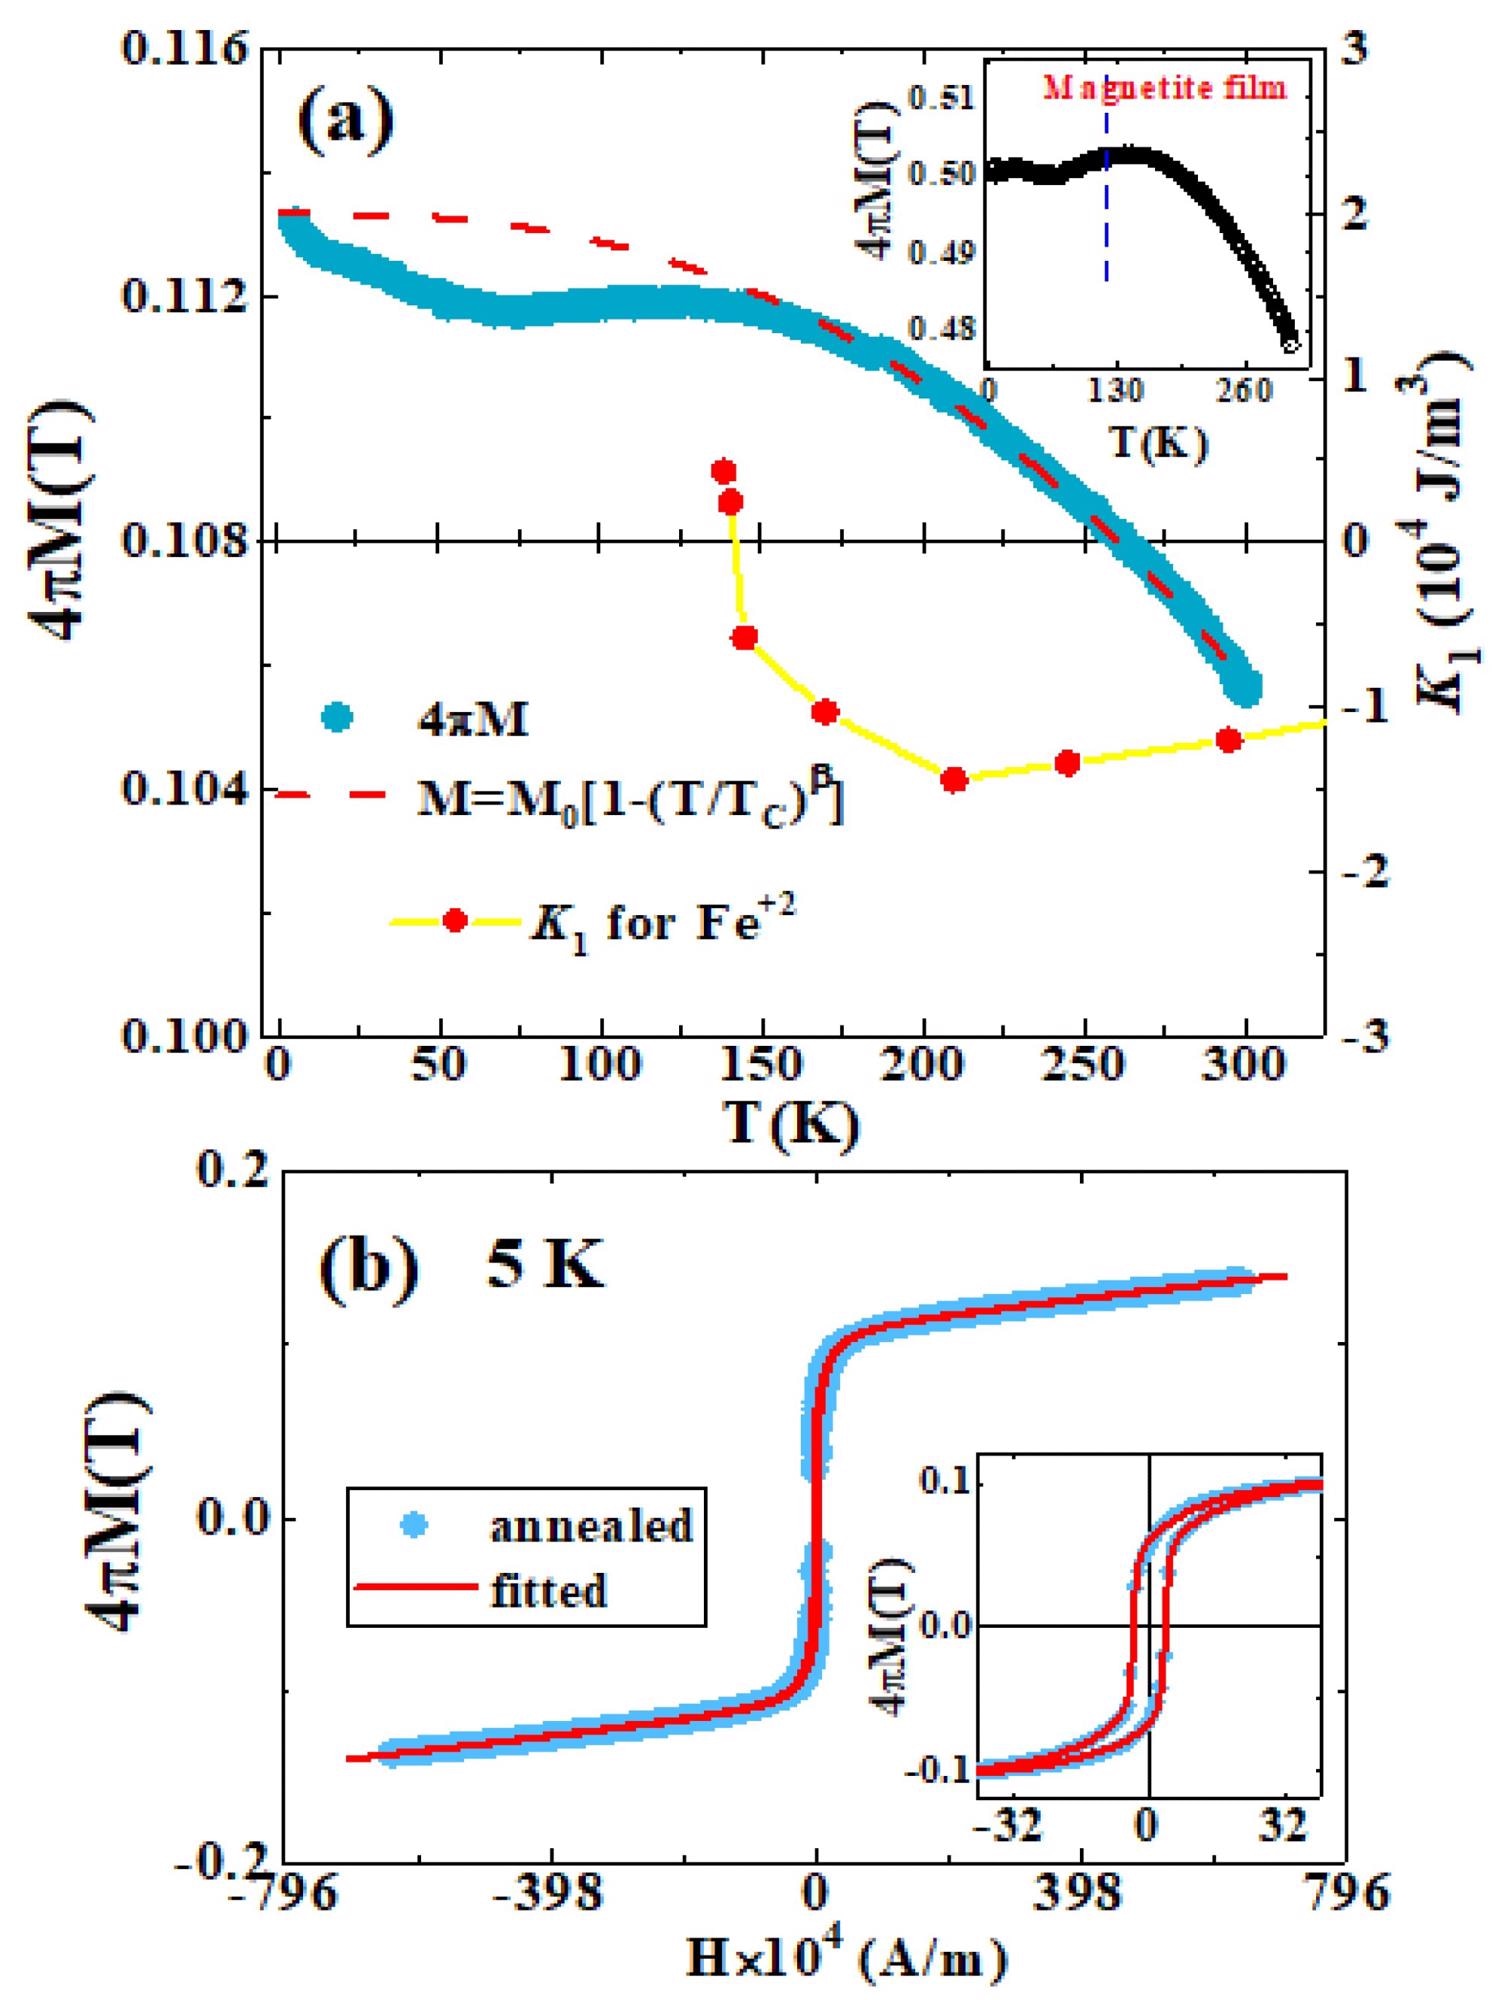 The M-T curve measured at 1.59 × 106 A/m for vacuum-annealed Zn-ferrite films (a). Red dashed lines indicate fitted data to the Bloch law. The red color closed symbol data for the K1 anisotropy constant of magnetite was taken from reference. The inset shows the M-T curve of magnetite thin films. The M-H loops of vacuum-annealed Zn-ferrite films were taken at 5 K (b).